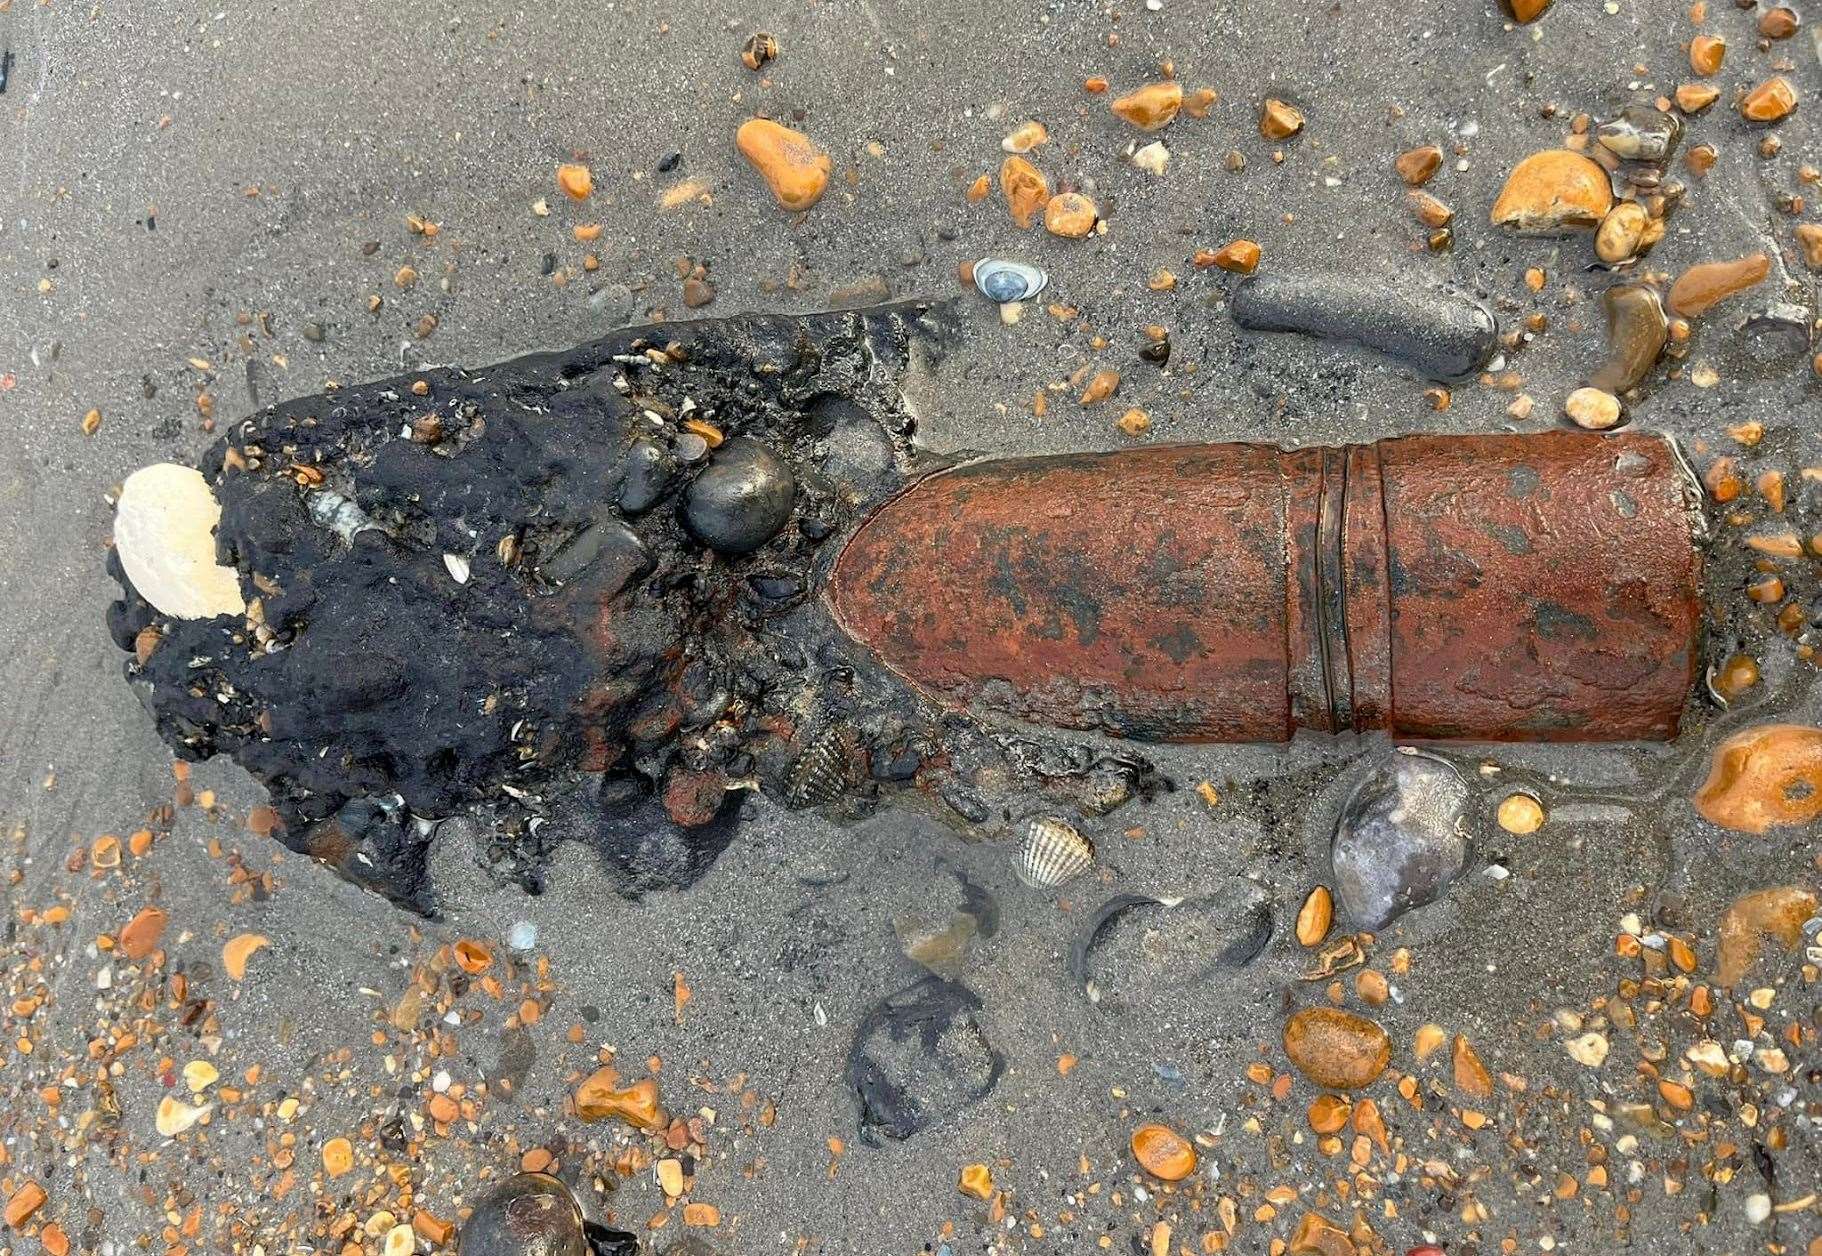 The 'bomb' was found on Sandwich Bay this morning